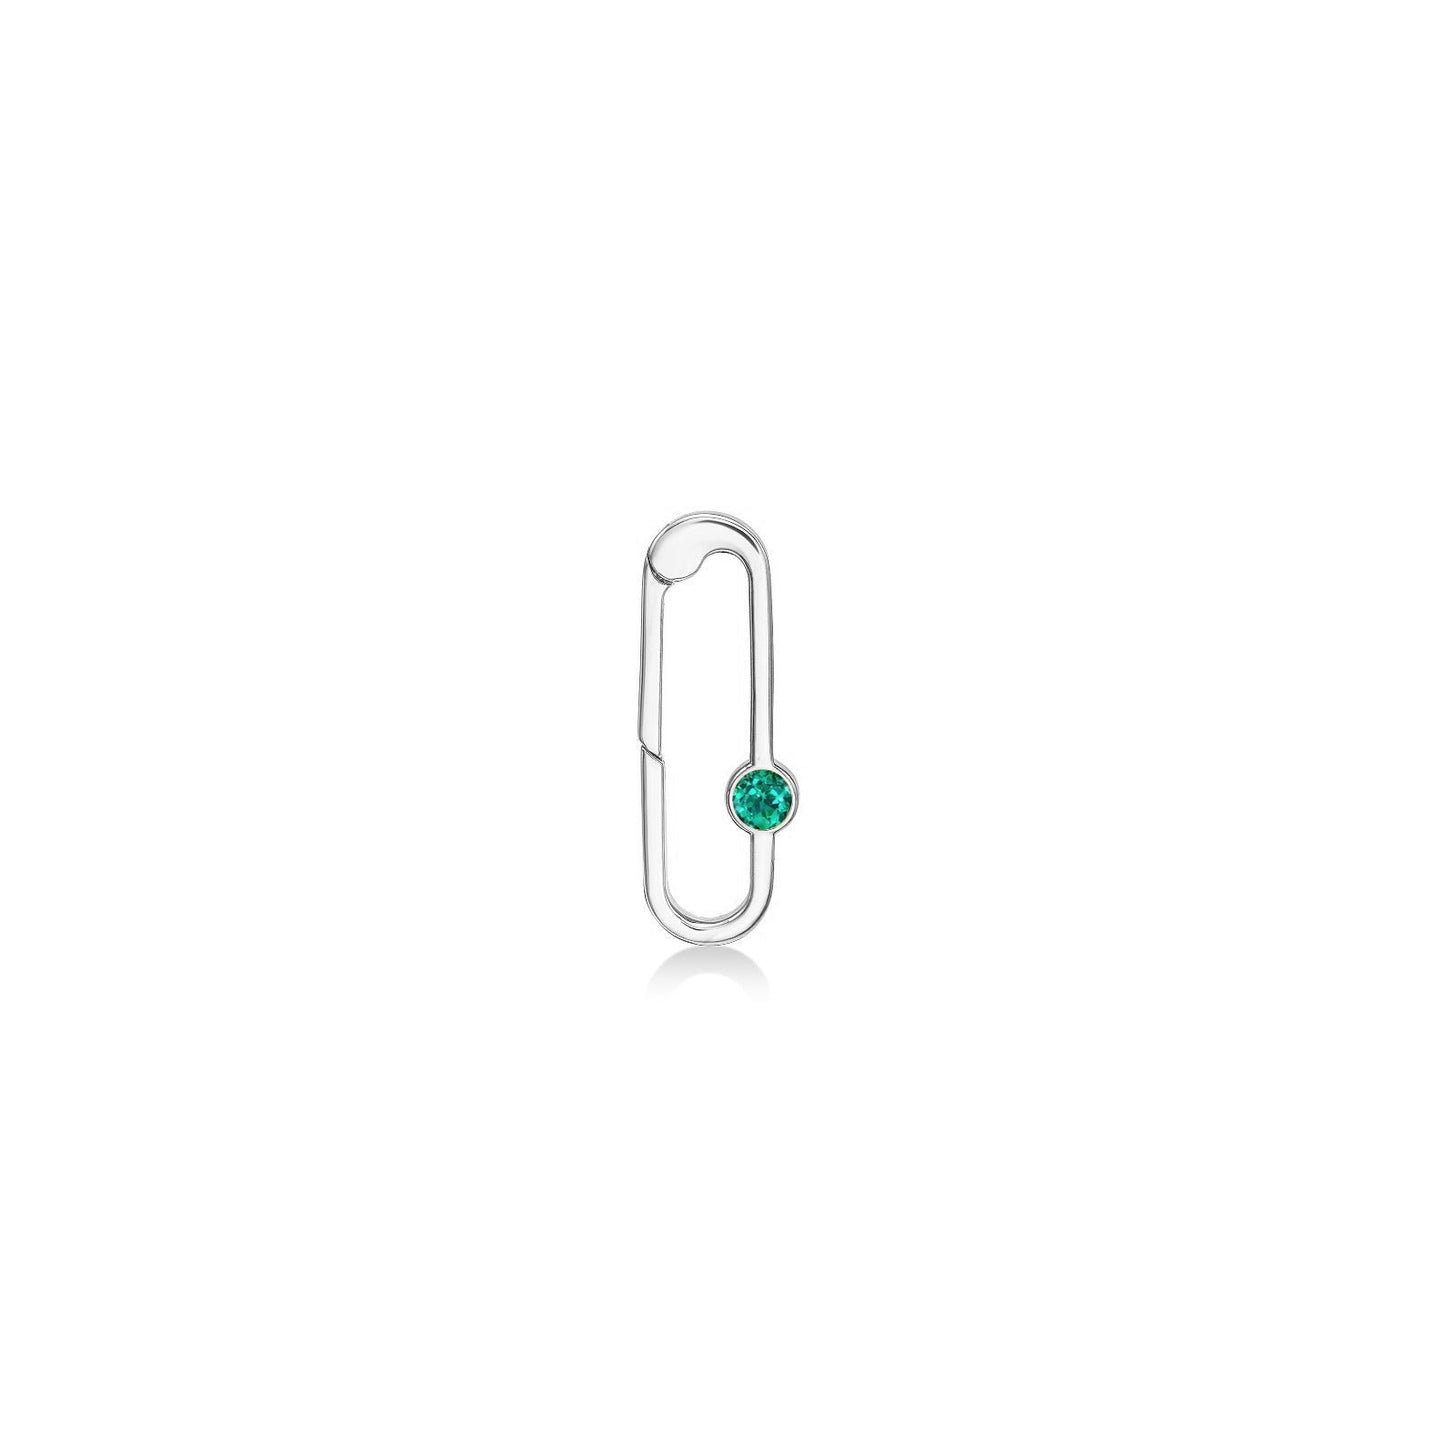 14k white gold paperclip charm lock with emerald